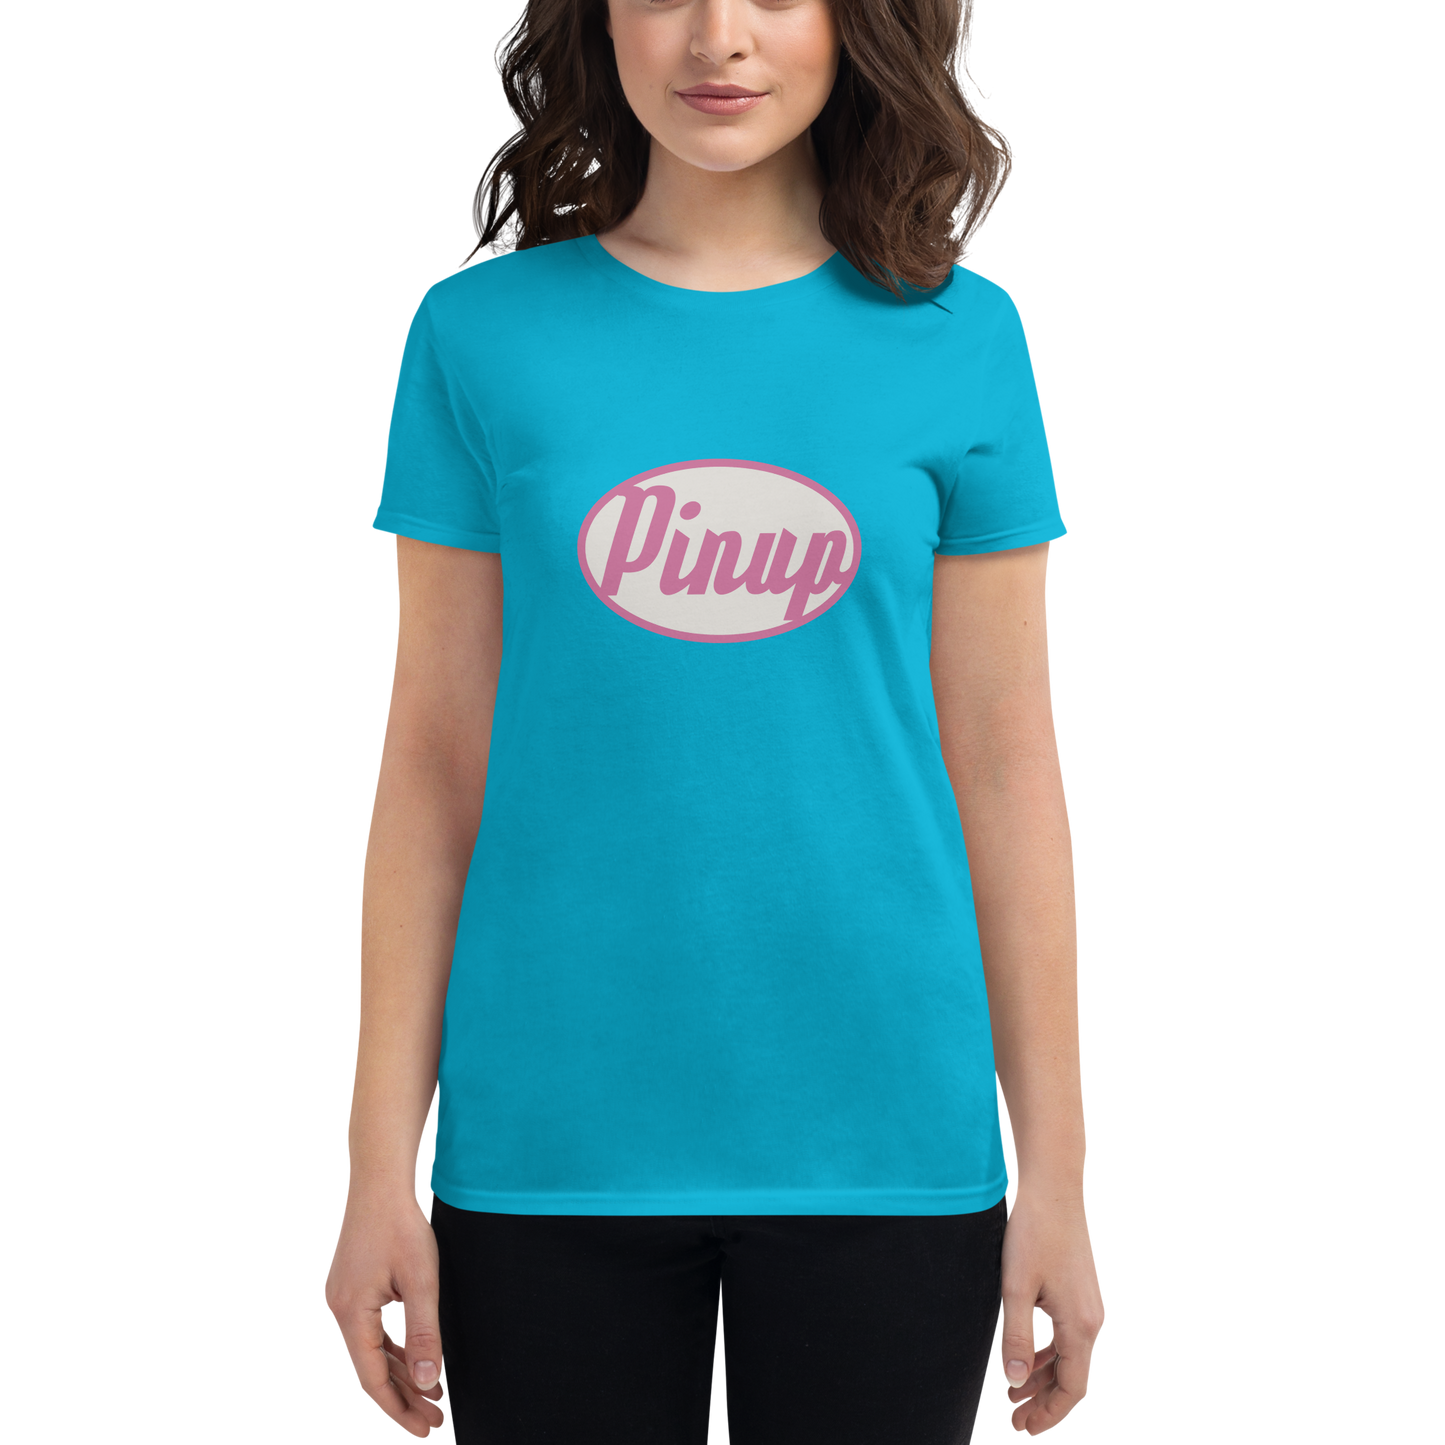 Pin-Up Women's Short Sleeve T-shirt - Just Like A Pinup